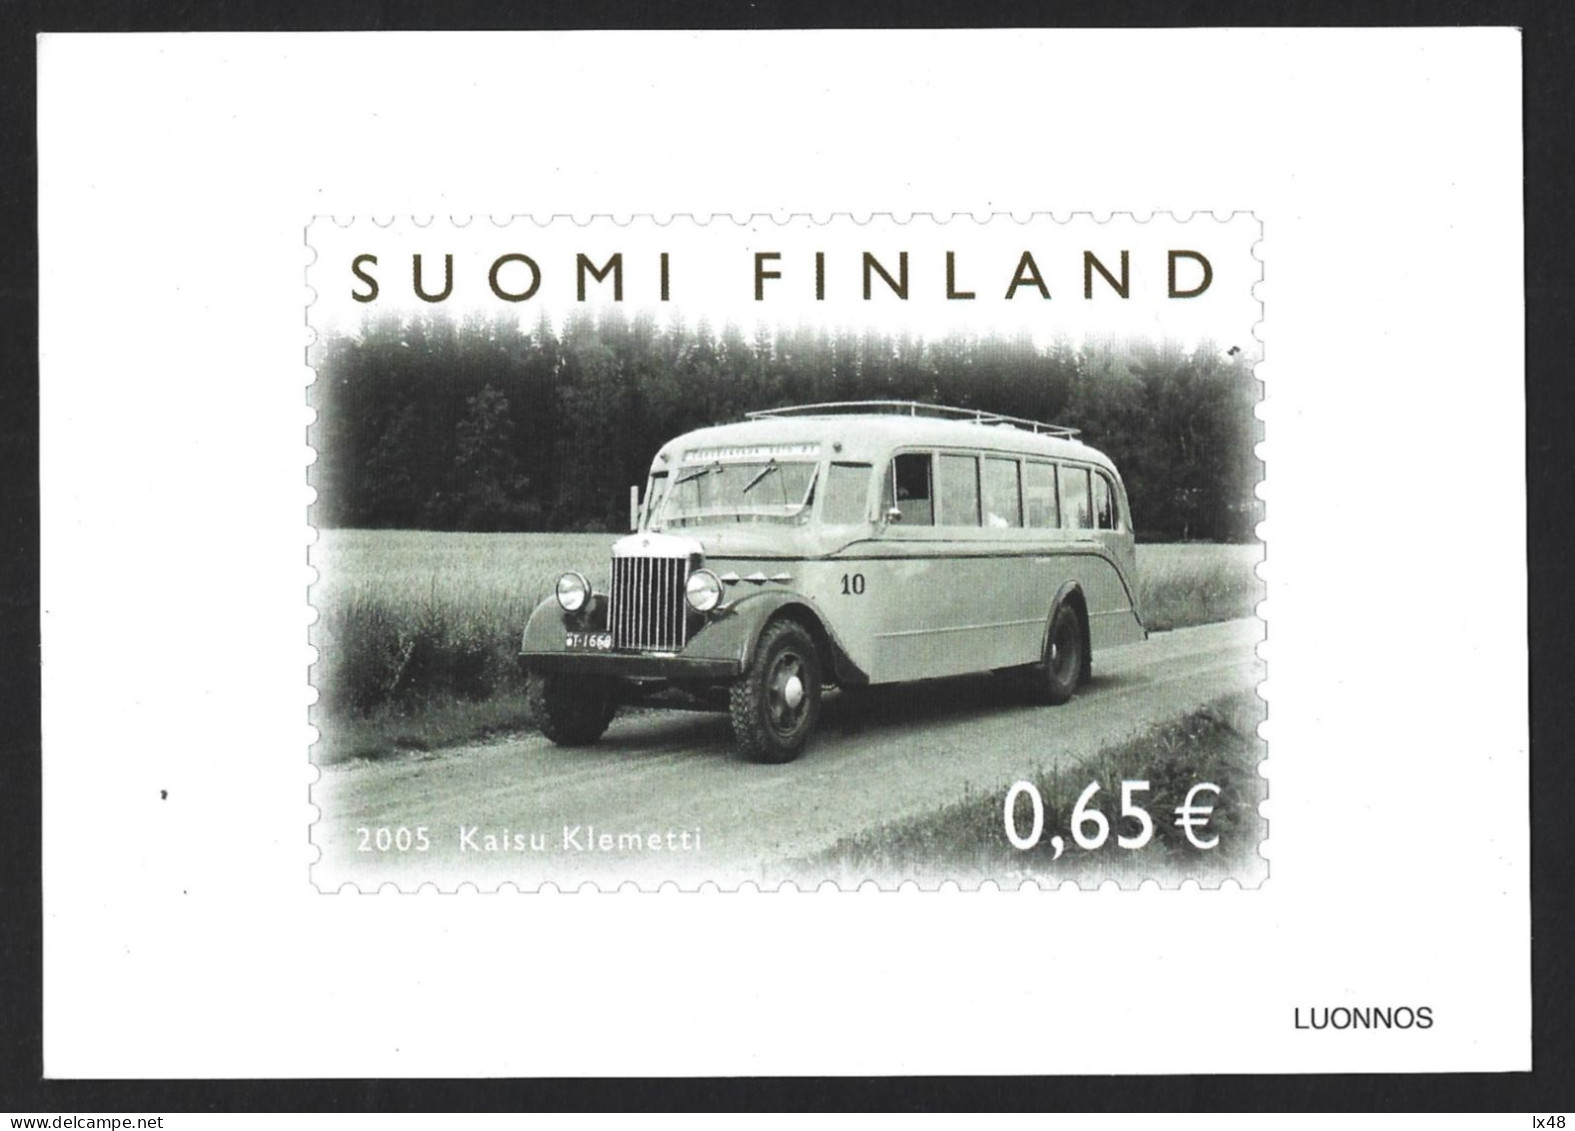 Black Photo Of The €0.65 Stamp From Finland With An Old Mercedes Passenger Car, Sent To The Press Before The Launch. Rar - Busses